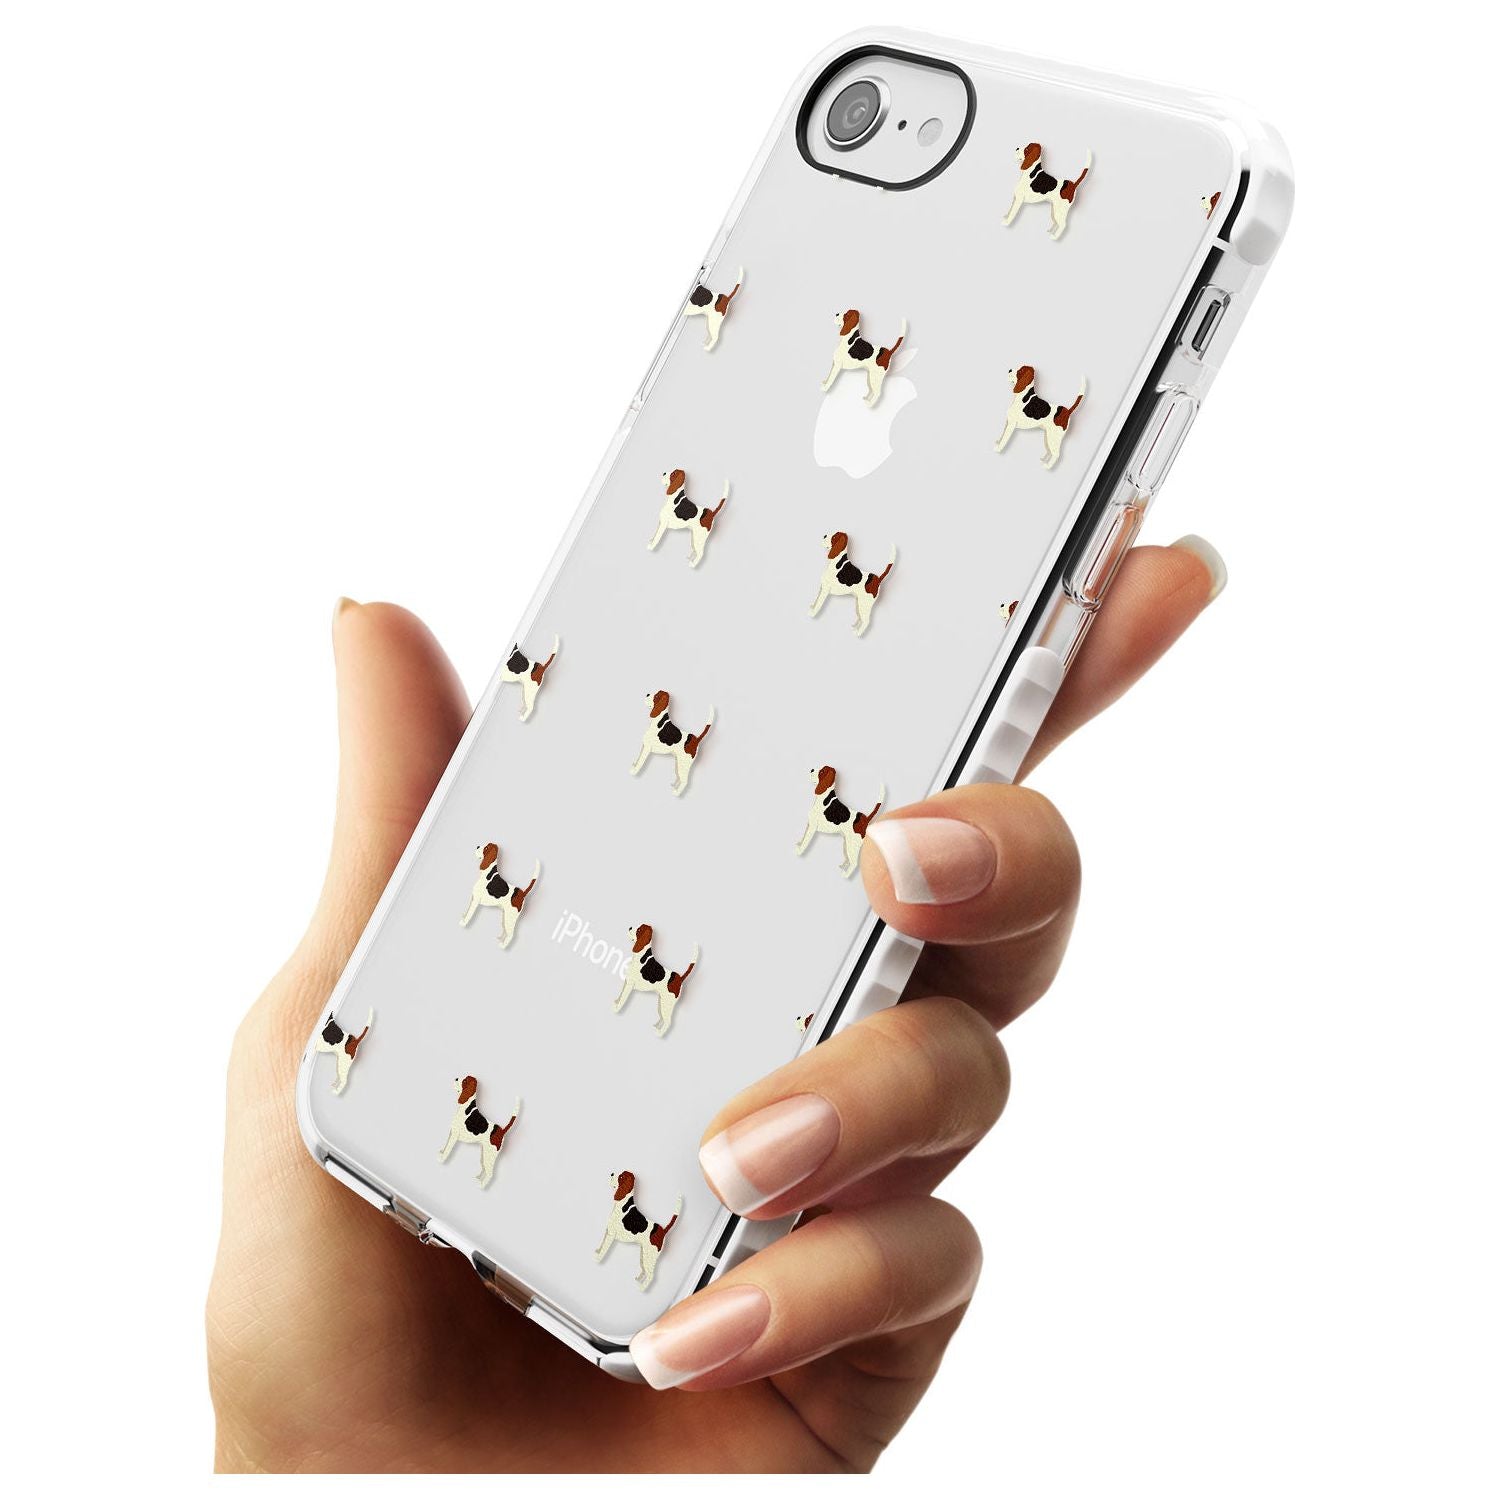 Beagle Dog Pattern Clear Impact Phone Case for iPhone SE 8 7 Plus